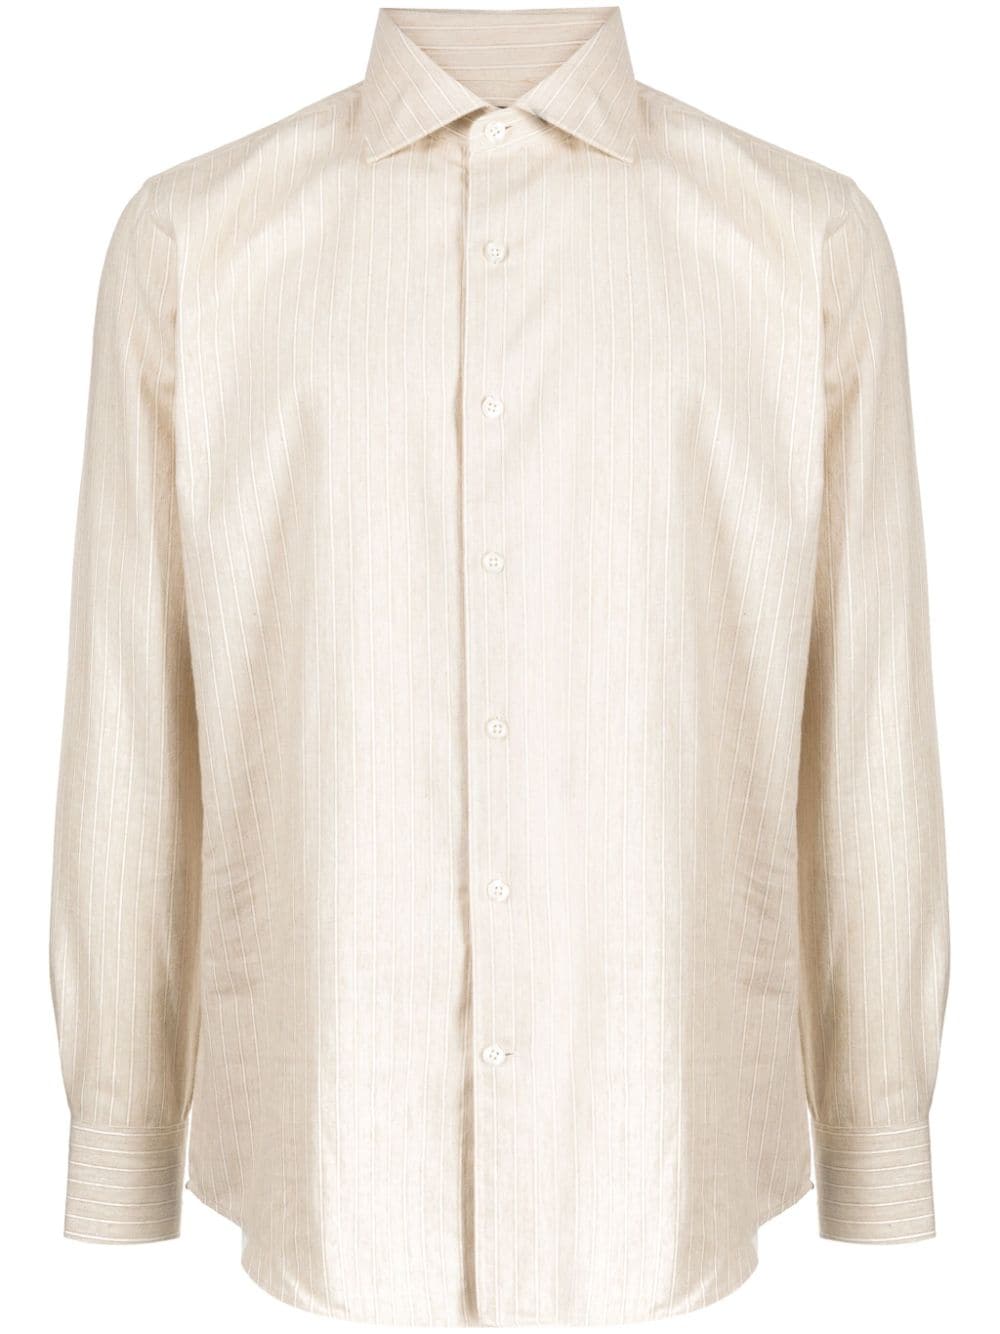 Man On The Boon. Striped Cotton Shirt In Neutrals